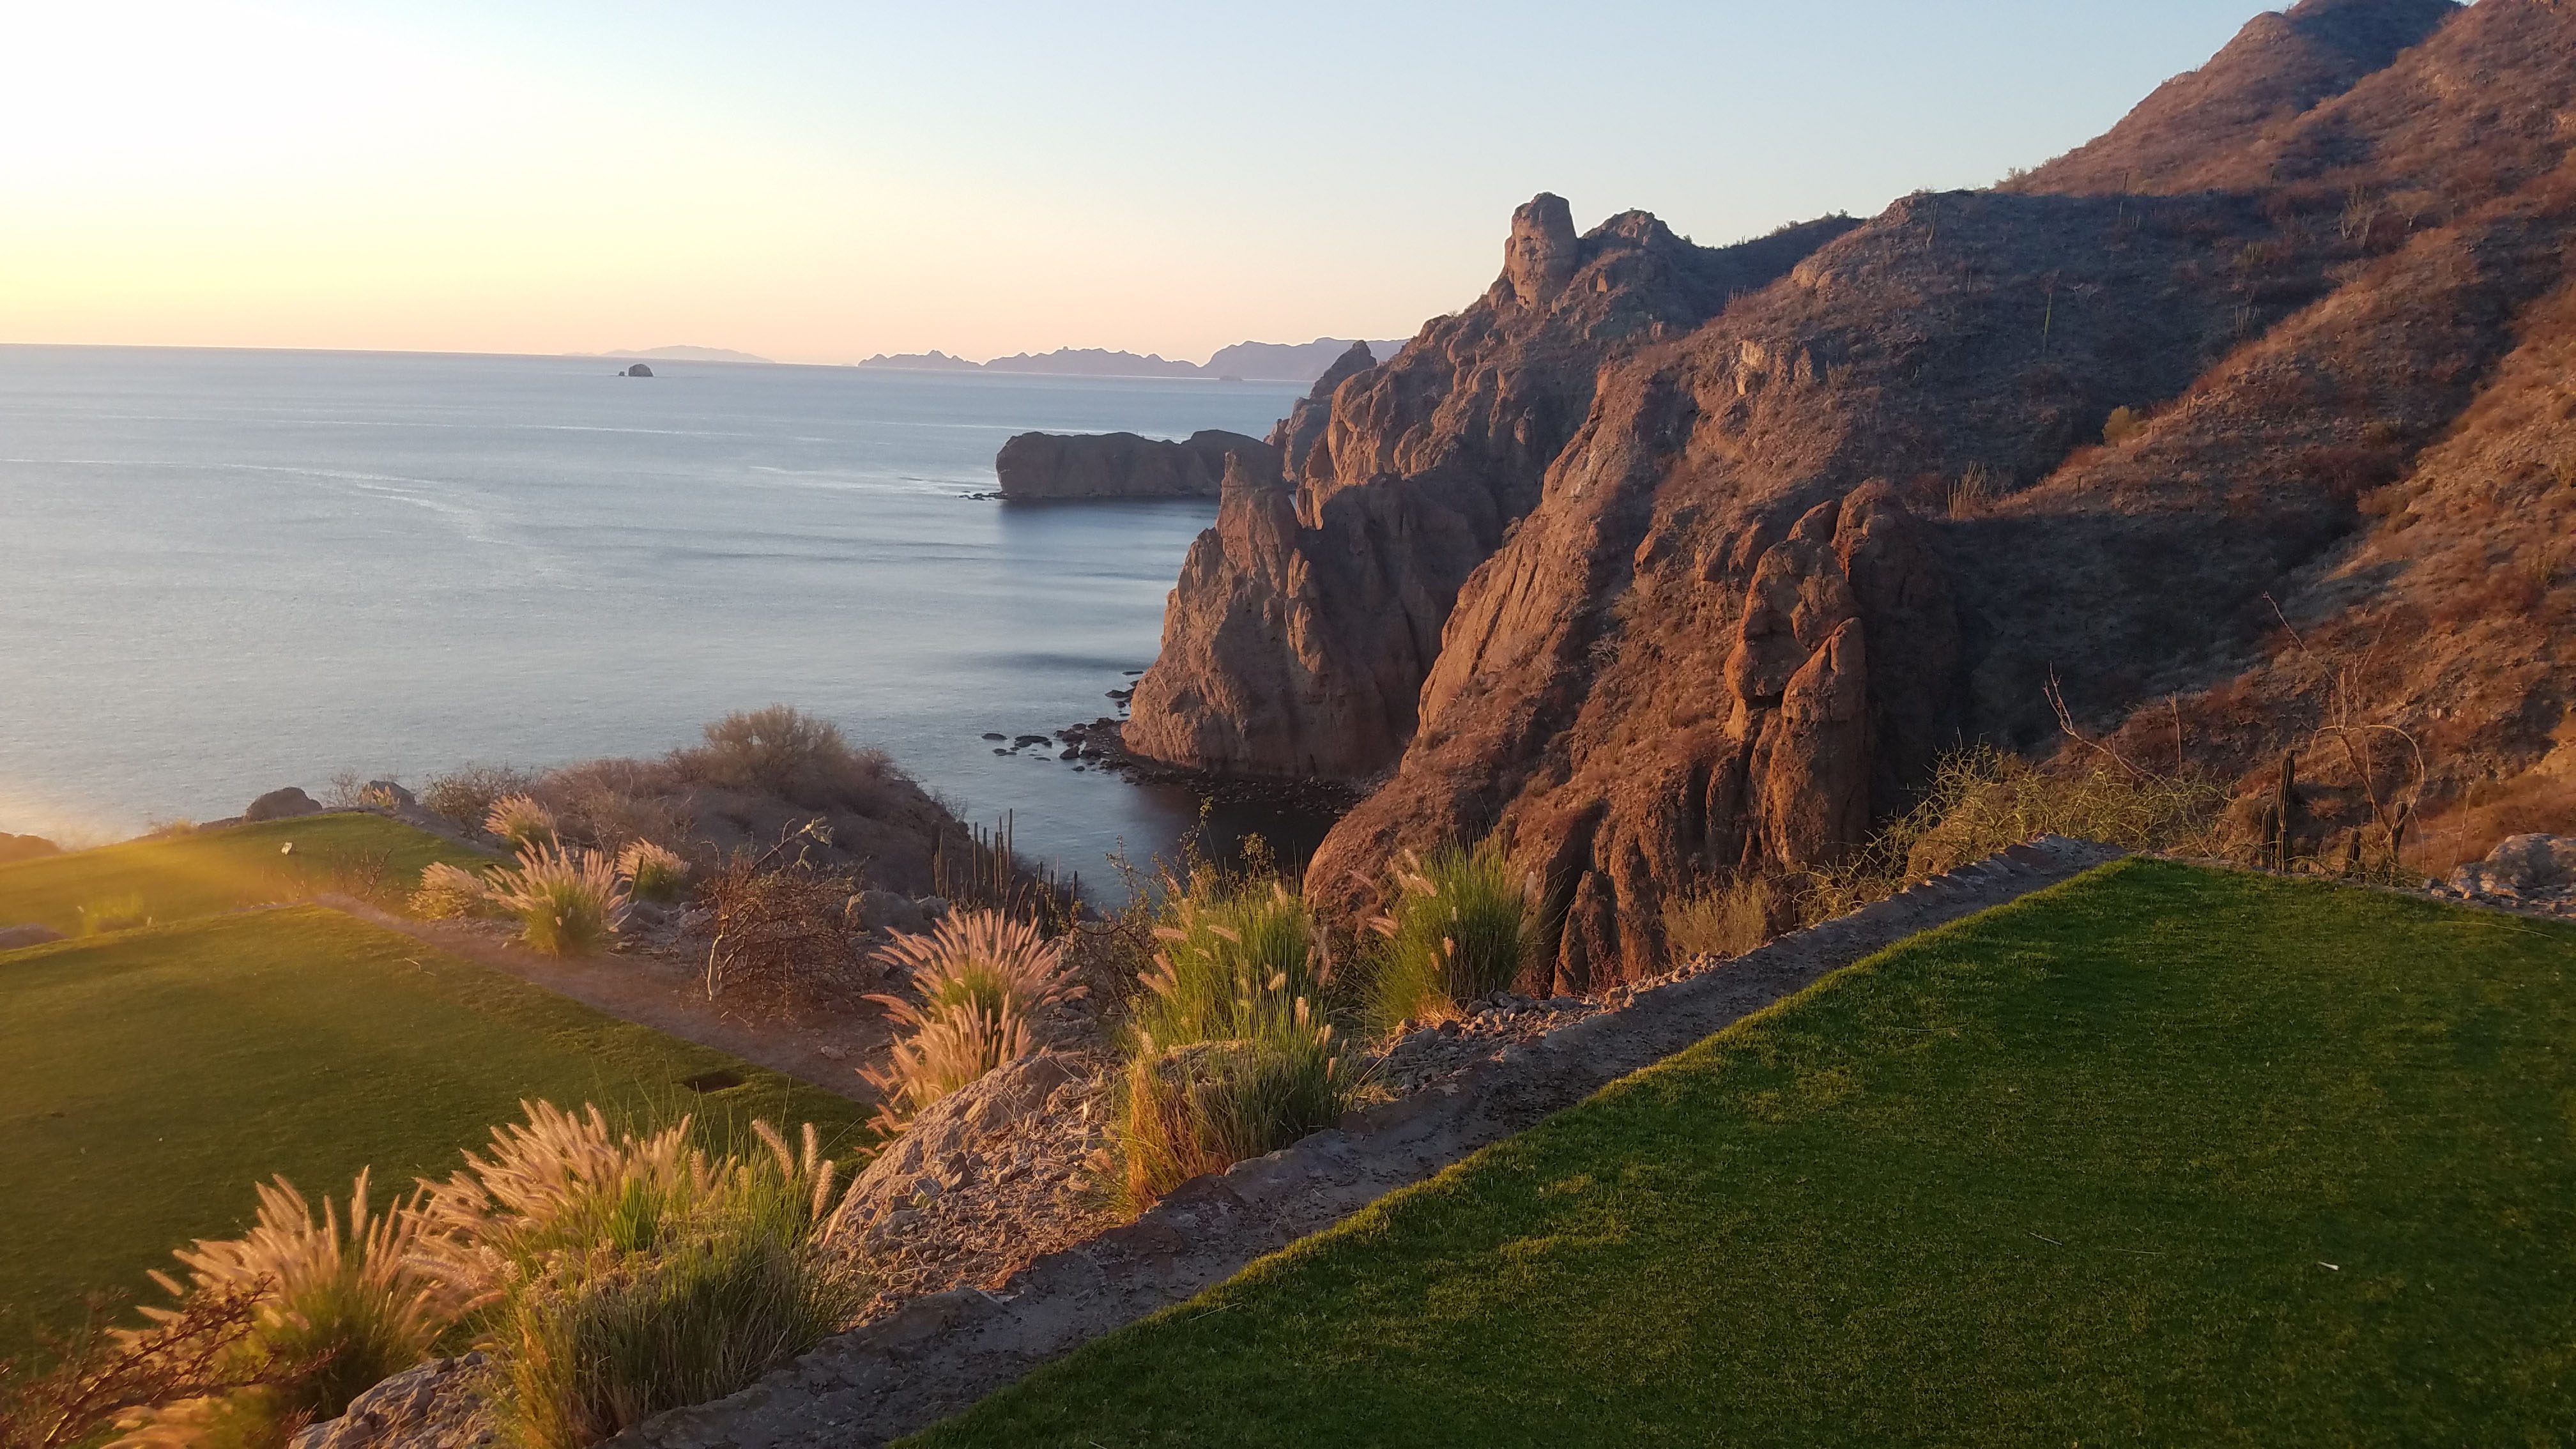 The 17th Tee overlooking the Sea of Cortez at The Danzante Bay golf course